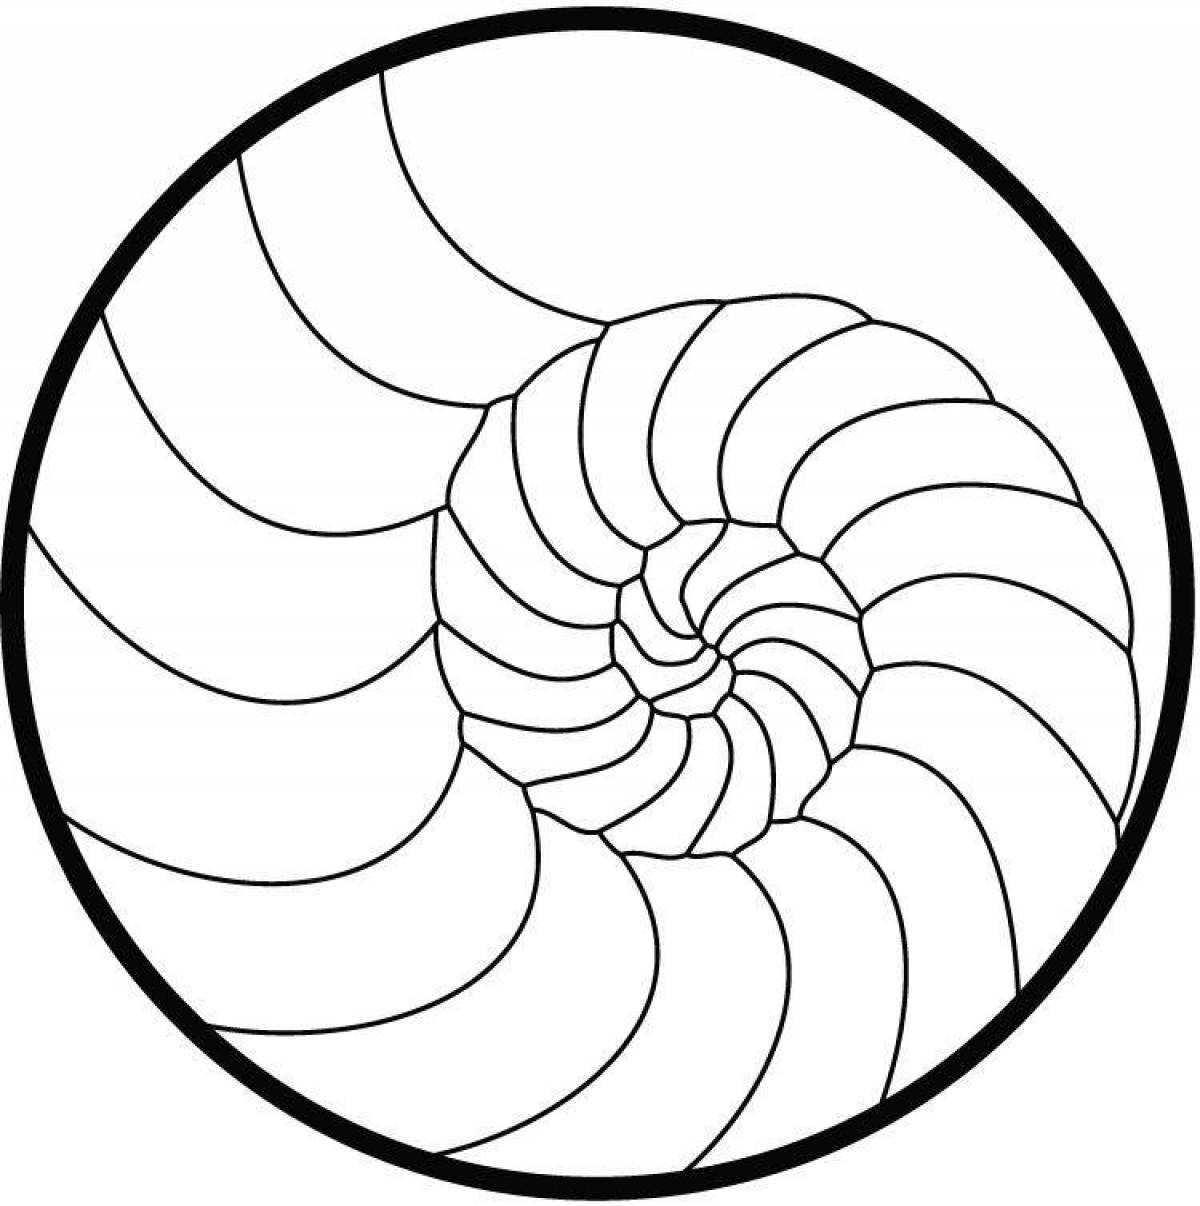 Sweet helix coloring book